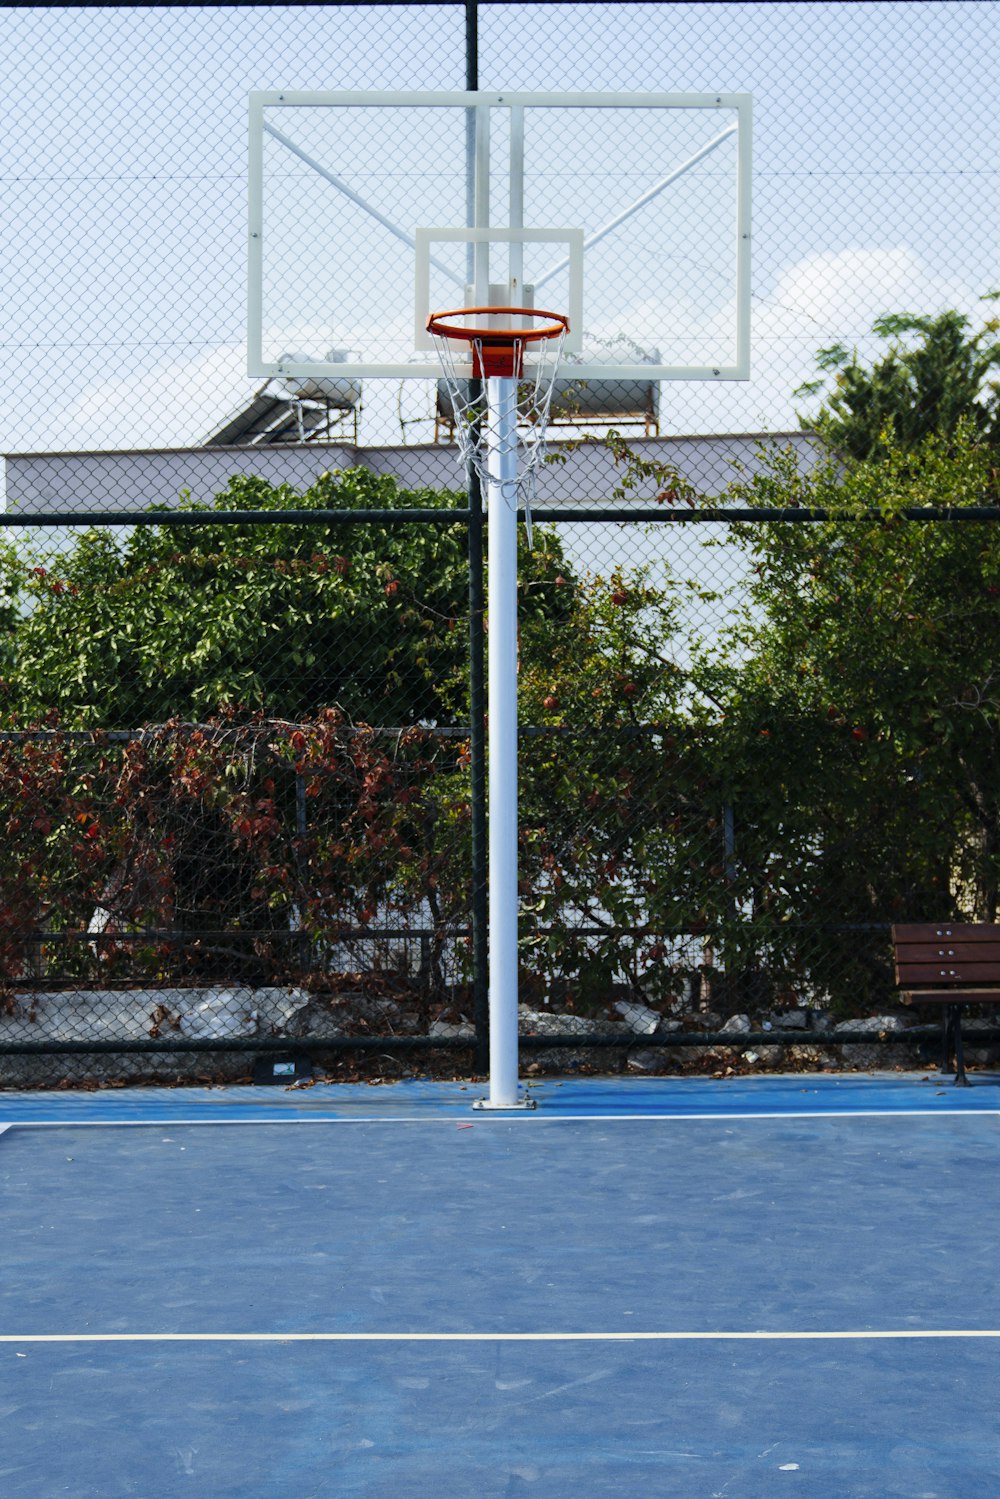 empty basketball court during daytime